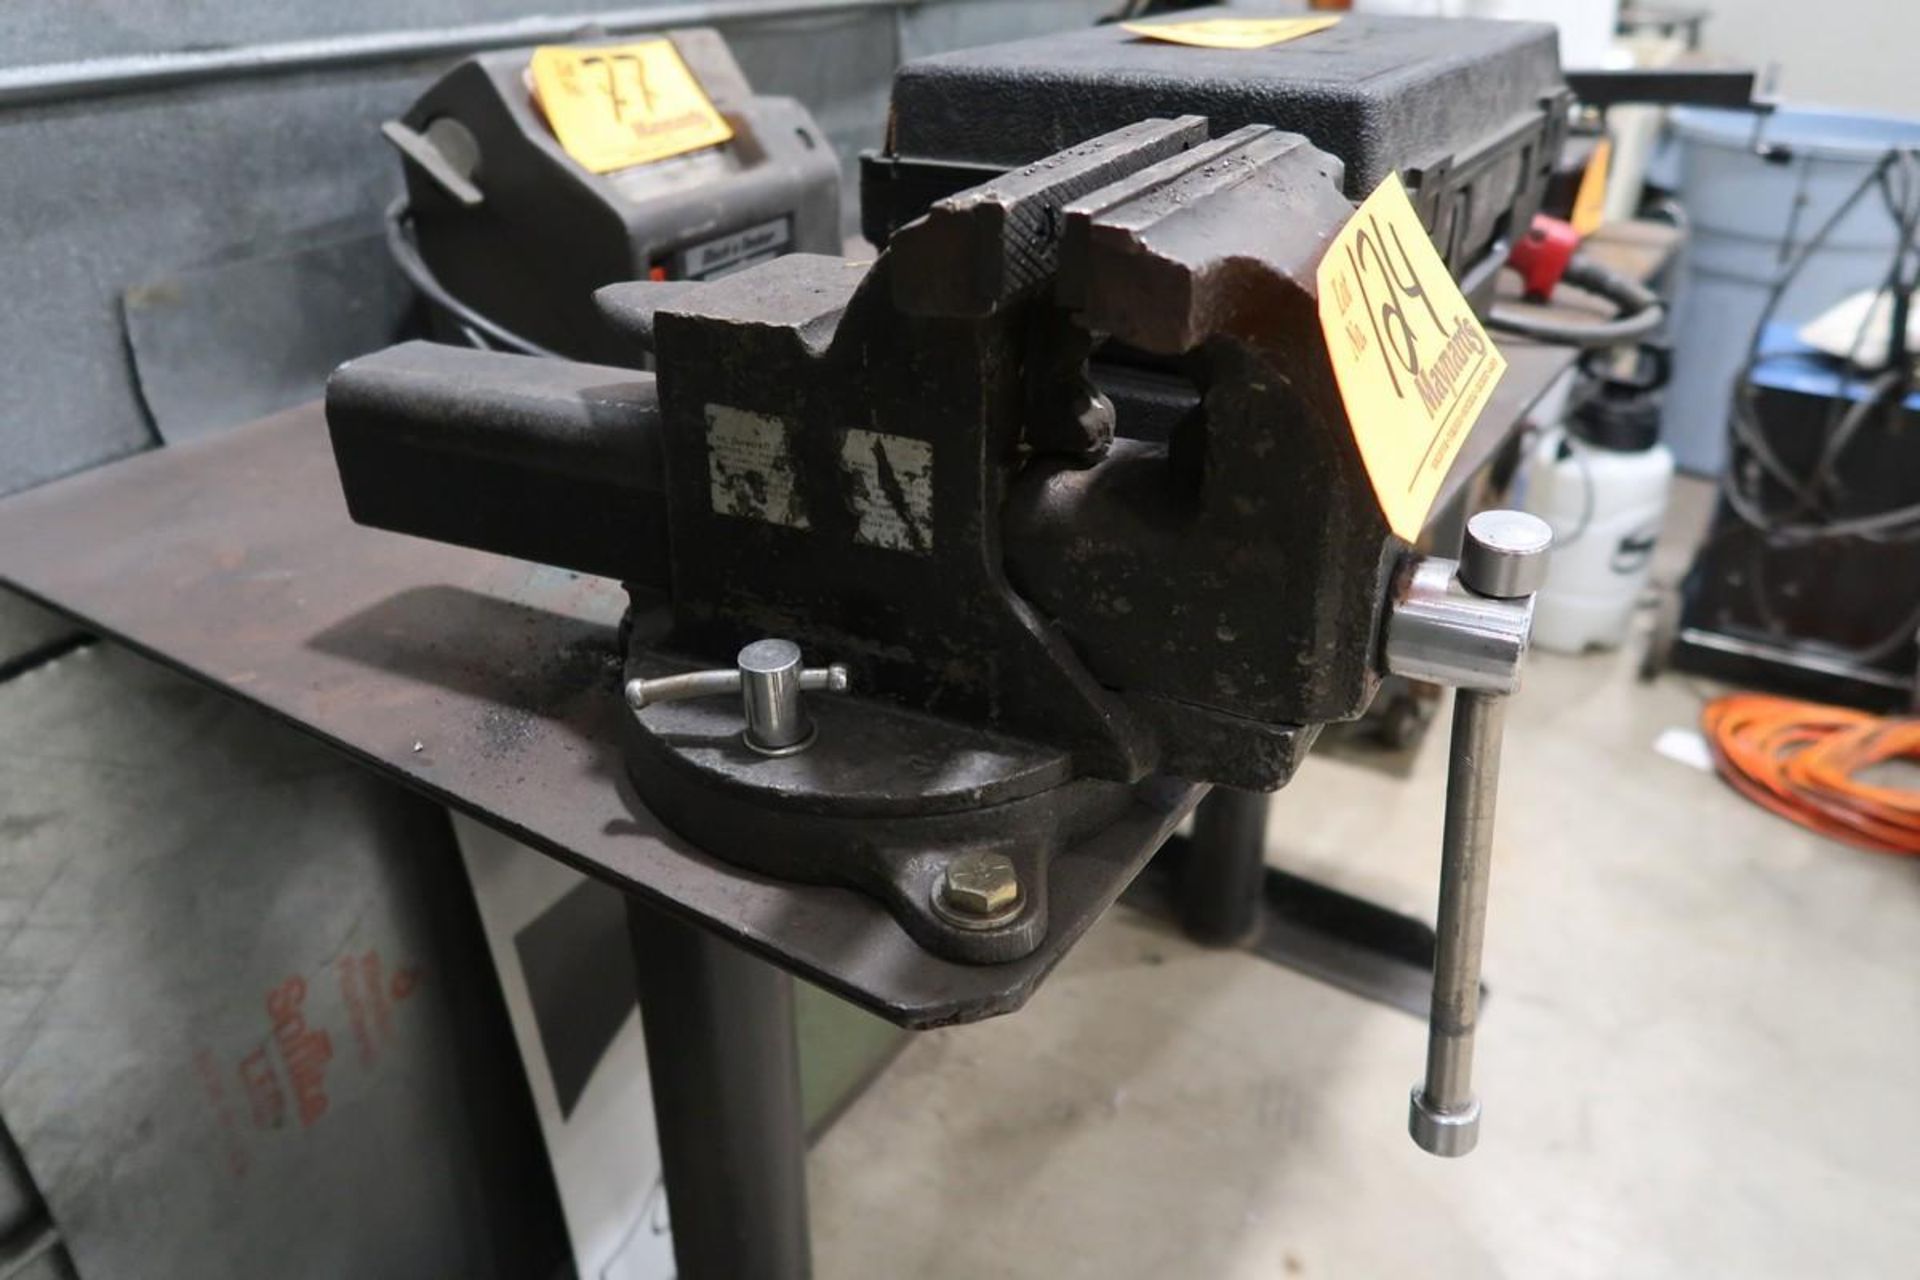 Steel Table with 6" Bench Vise - Image 2 of 2